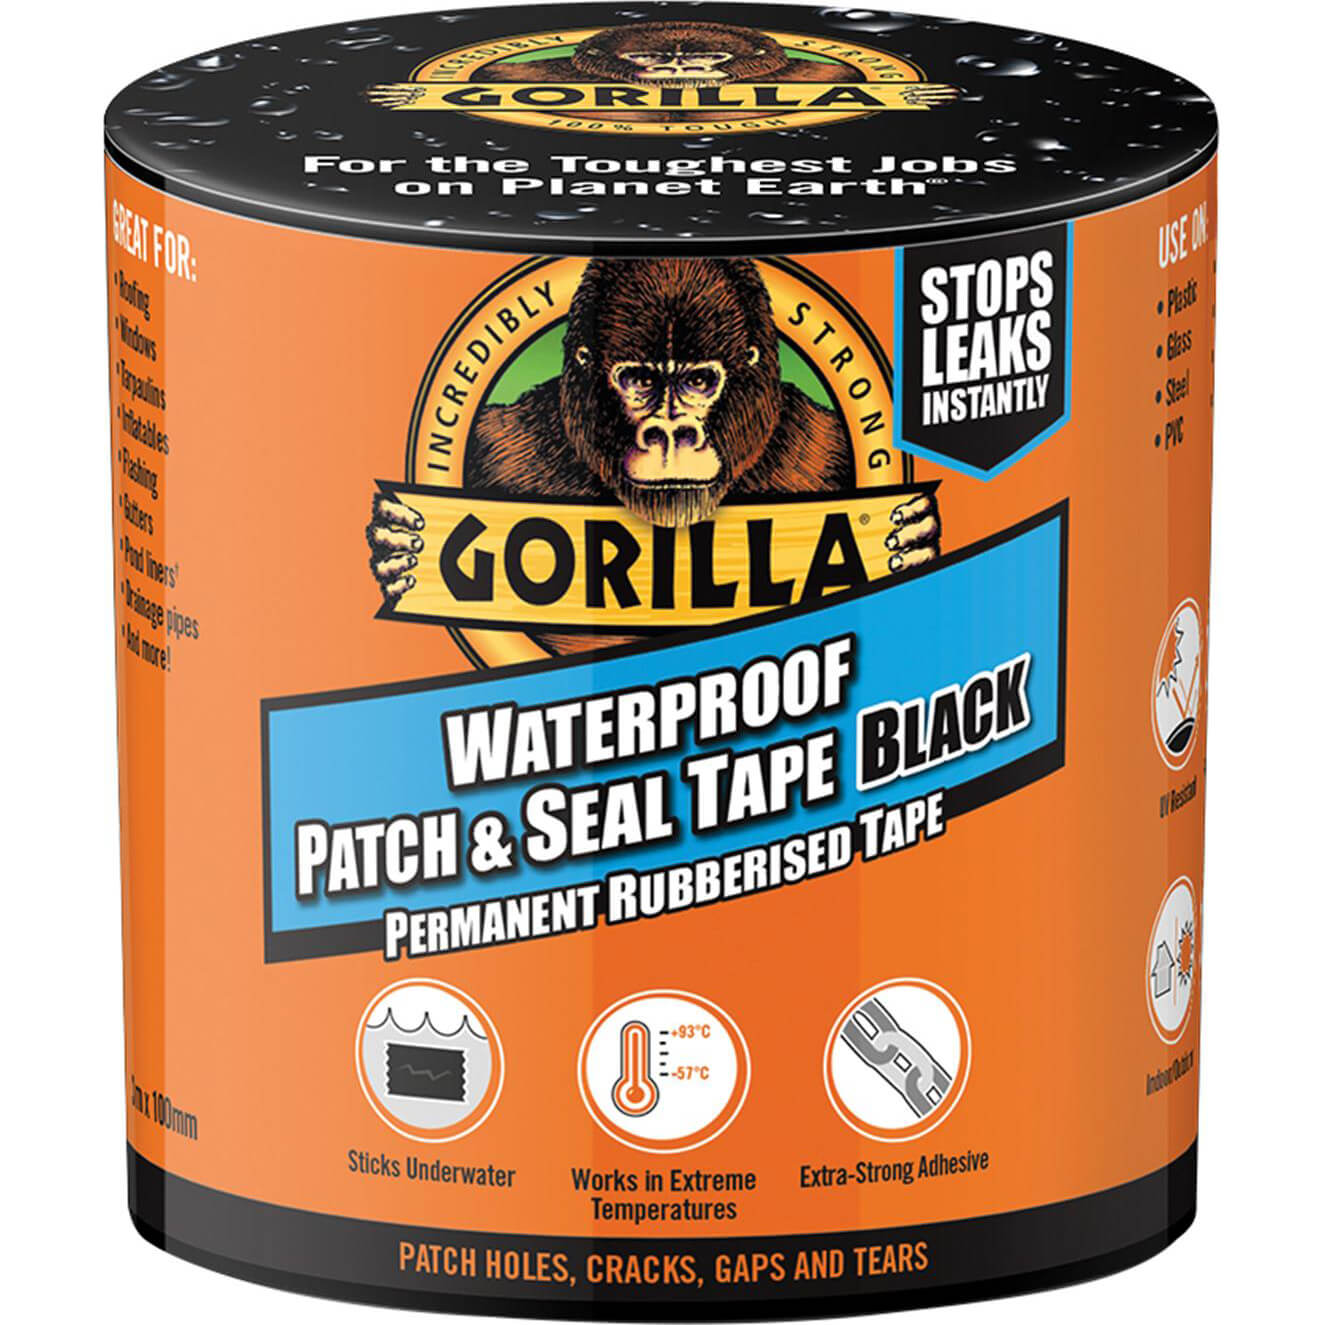 Image of Gorilla Glue Waterproof Patch and Seal Tape Black 100mm 3m